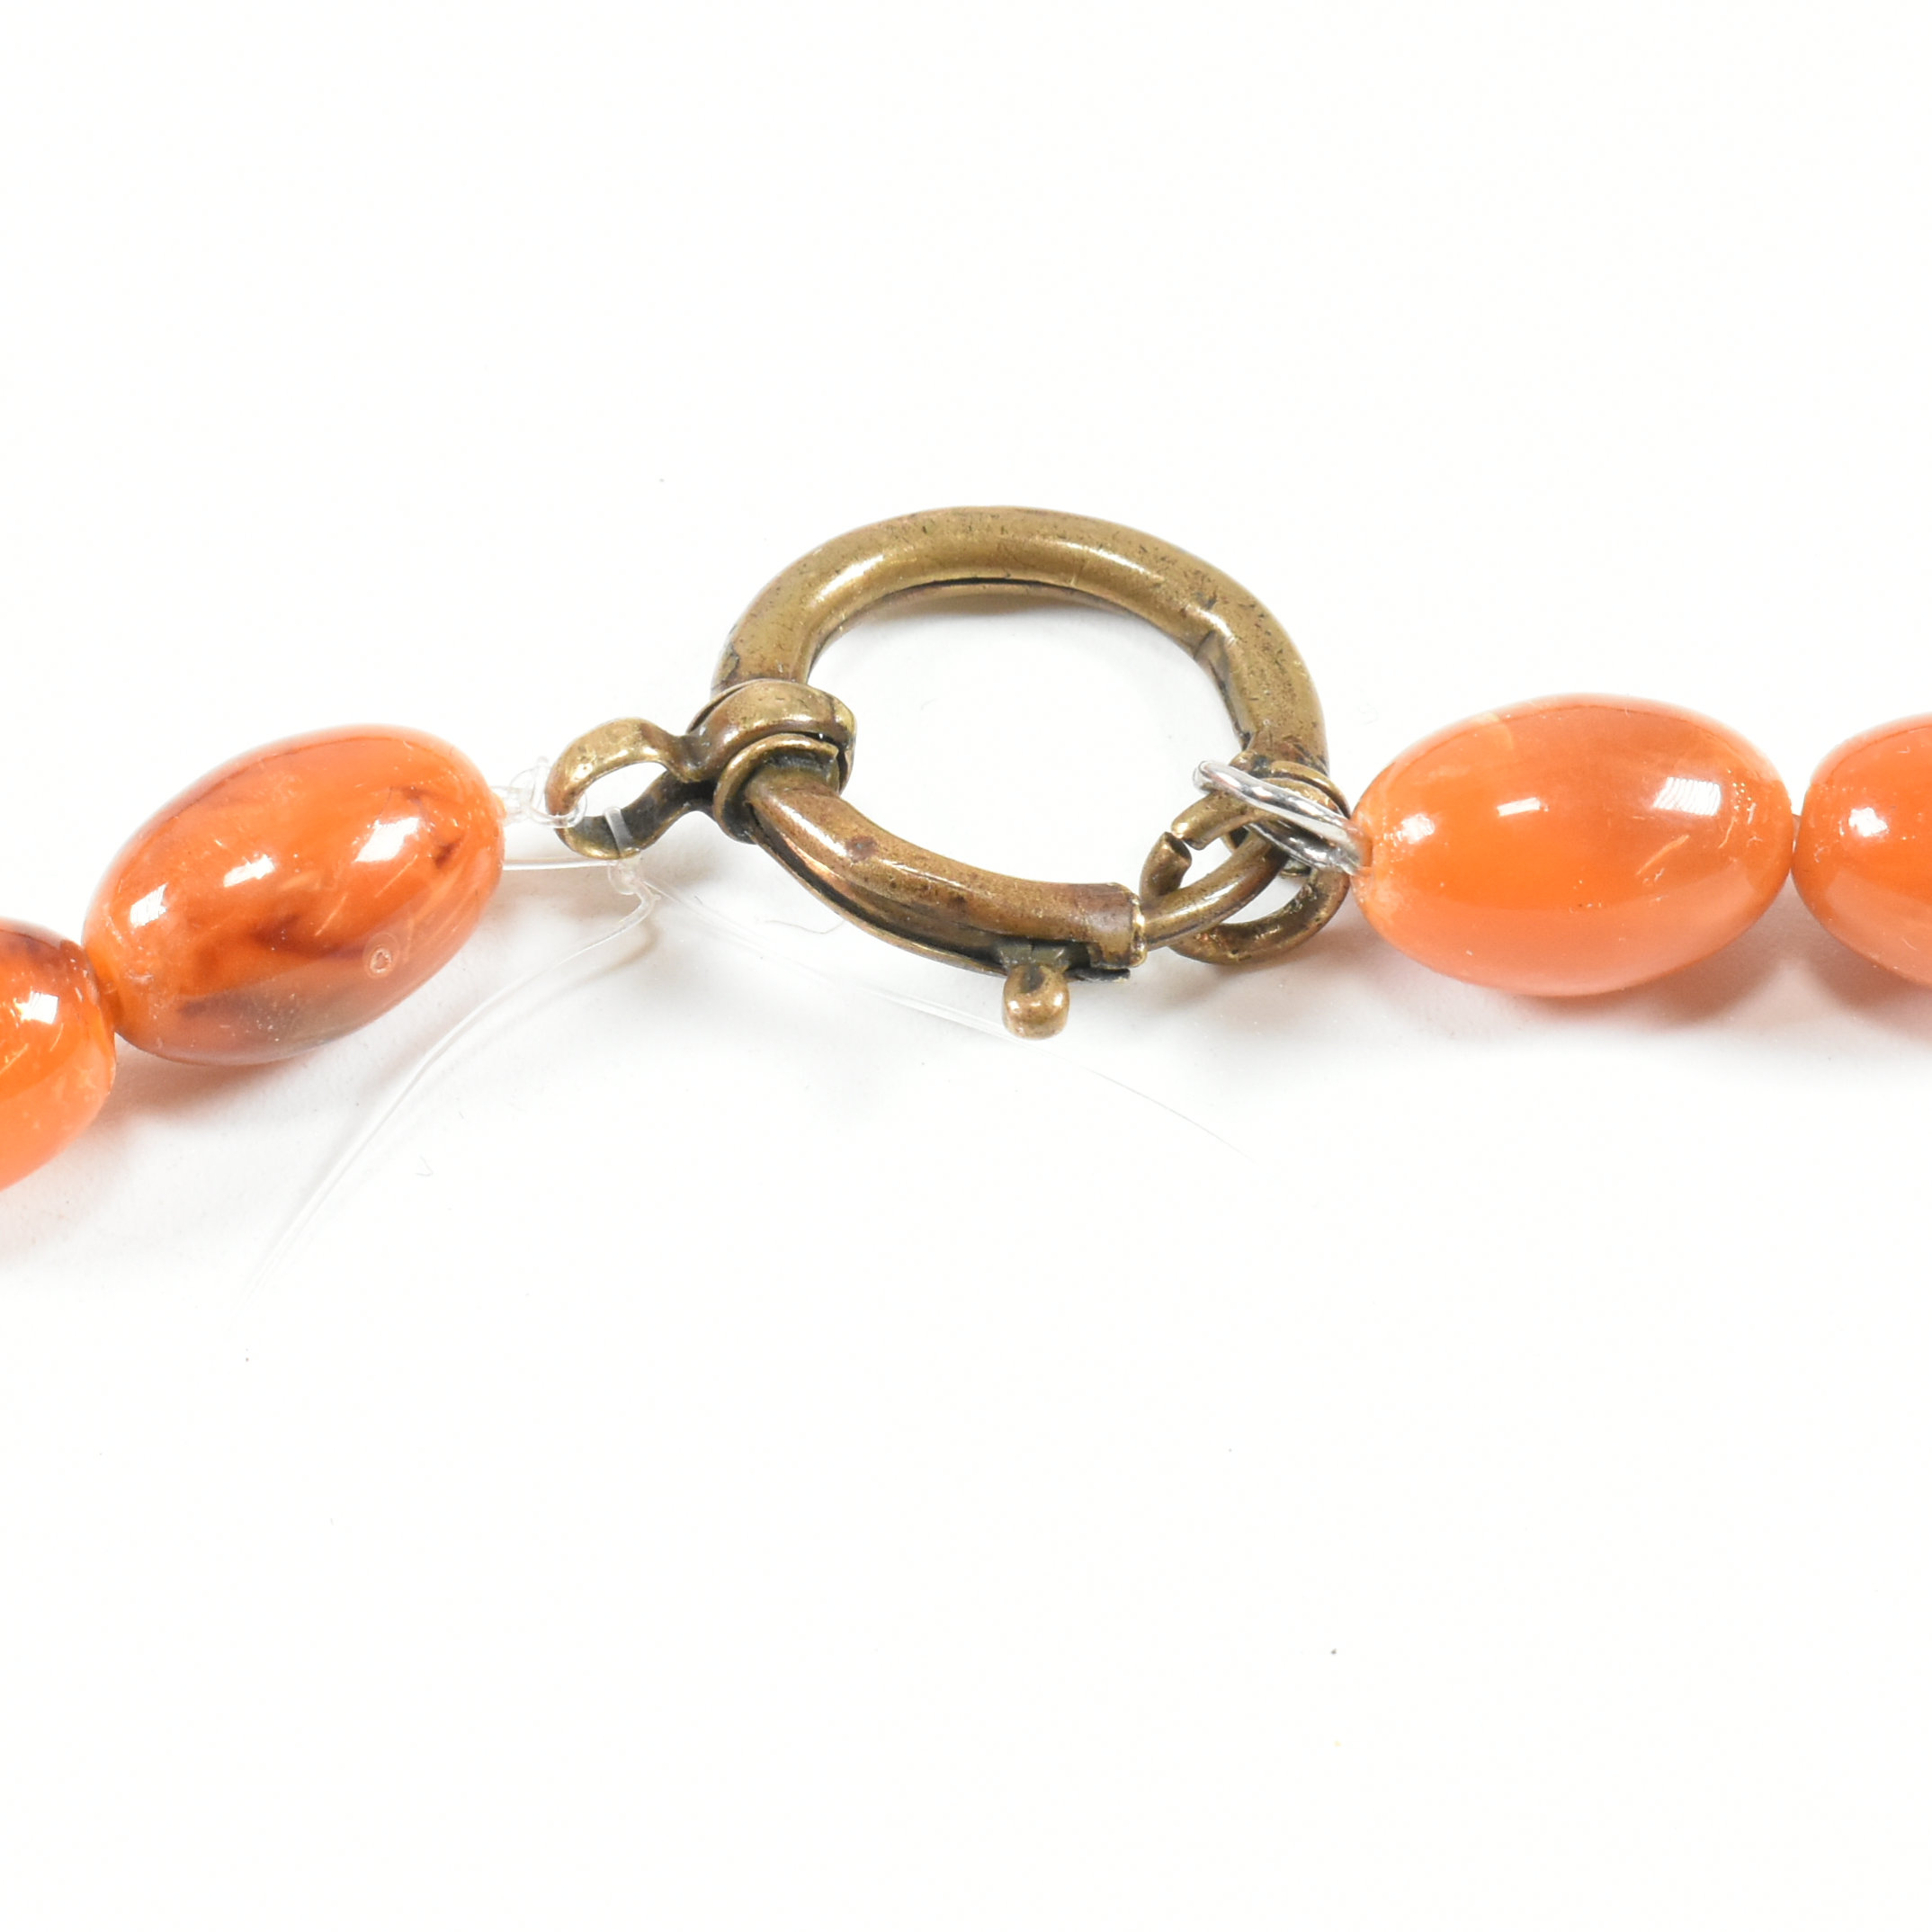 VINTAGE AMBER BEAD NECKLACE - Image 3 of 12